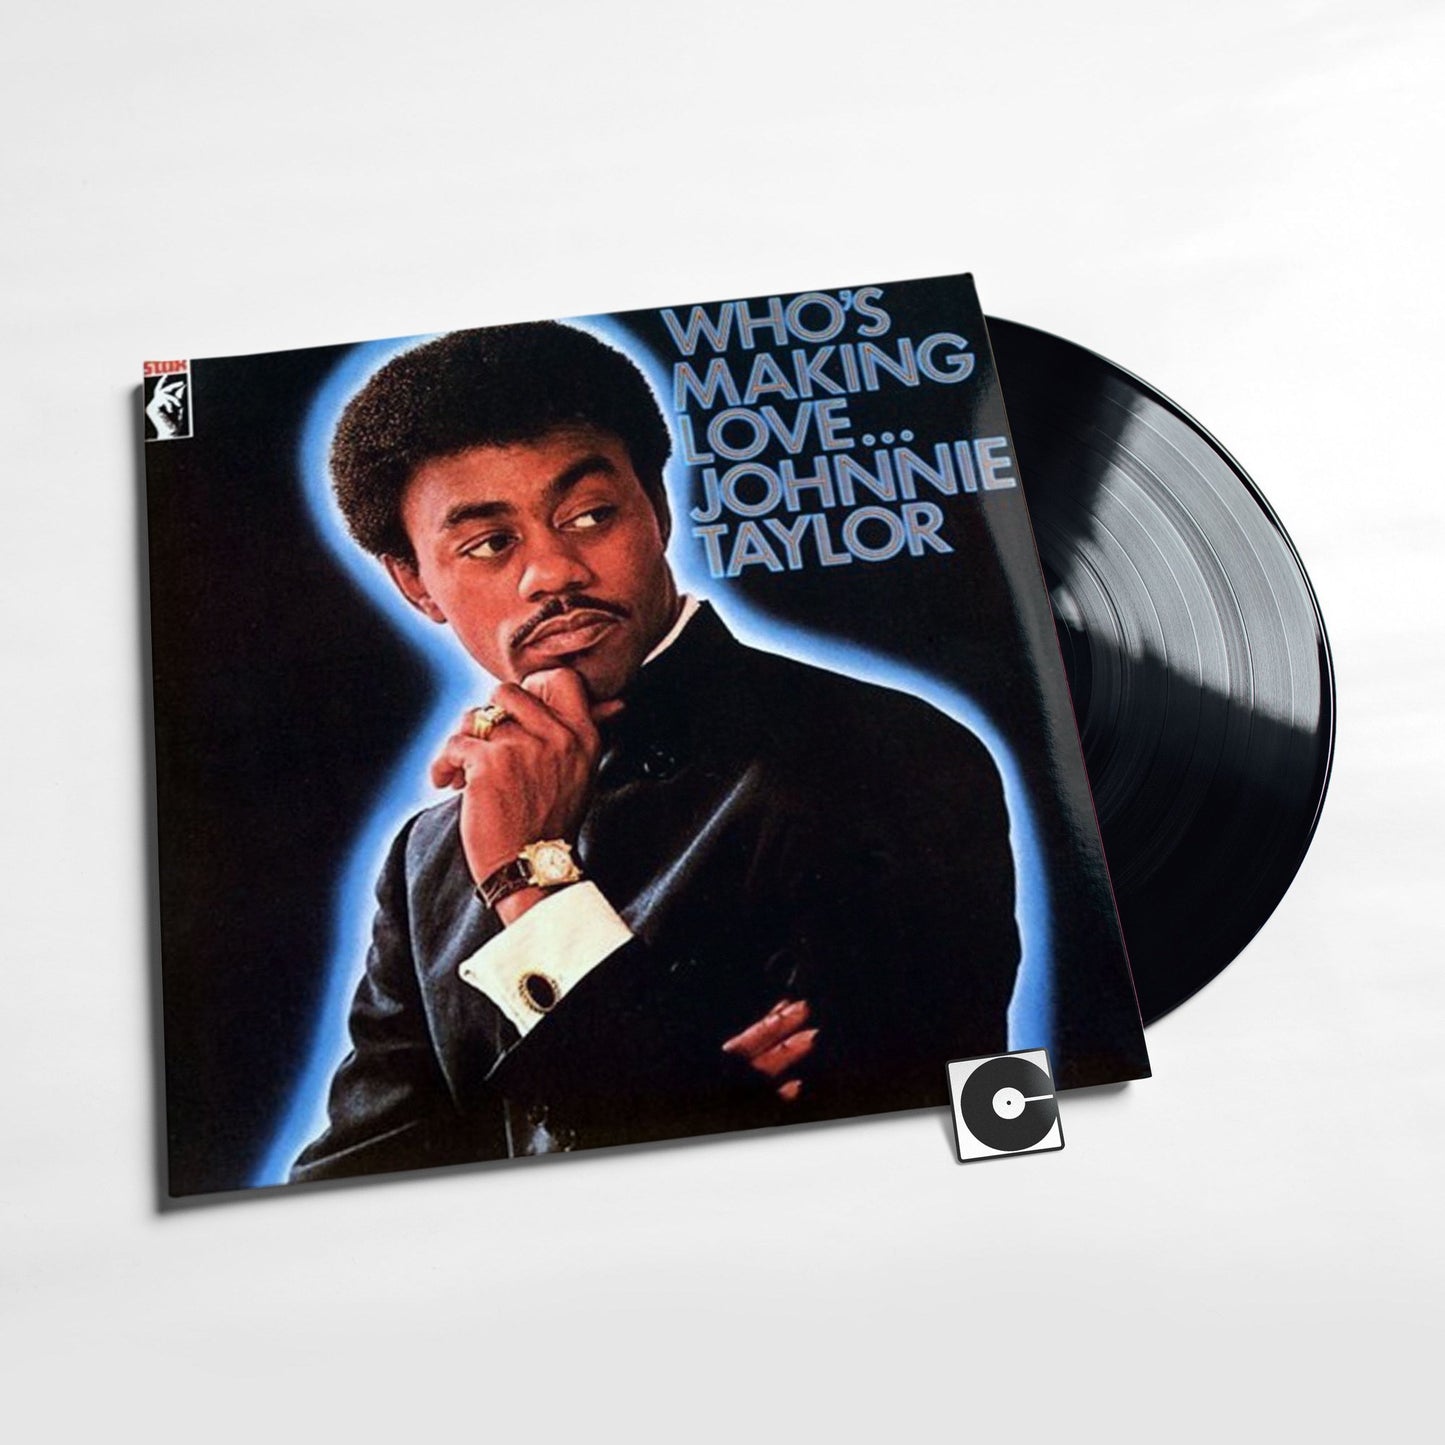 Johnnie Taylor - "Who's Making Love"